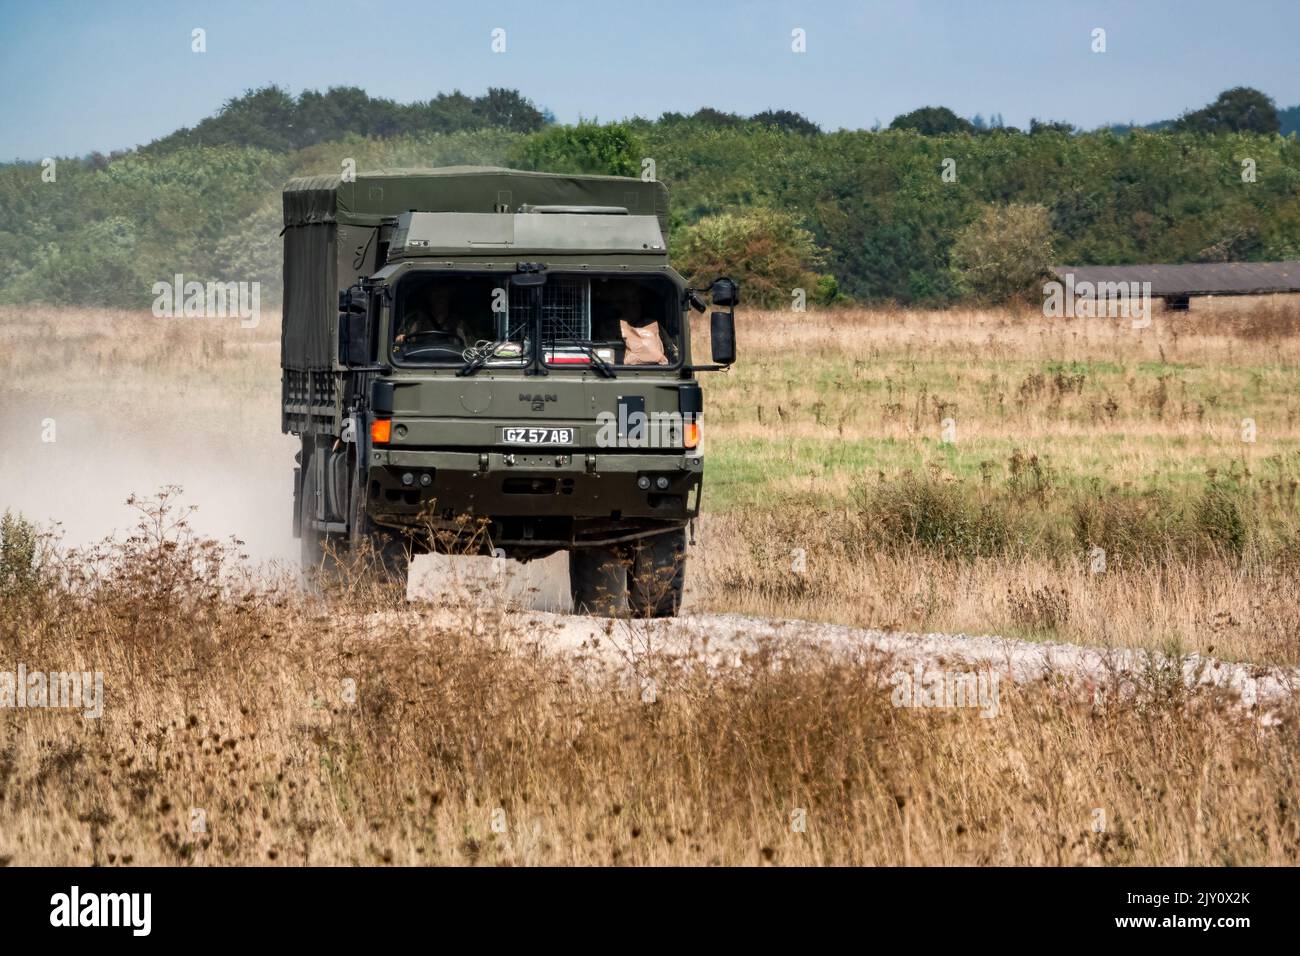 British army MAN HX60 4x4 Heavy Utility Truck in action on a military exercise Stock Photo